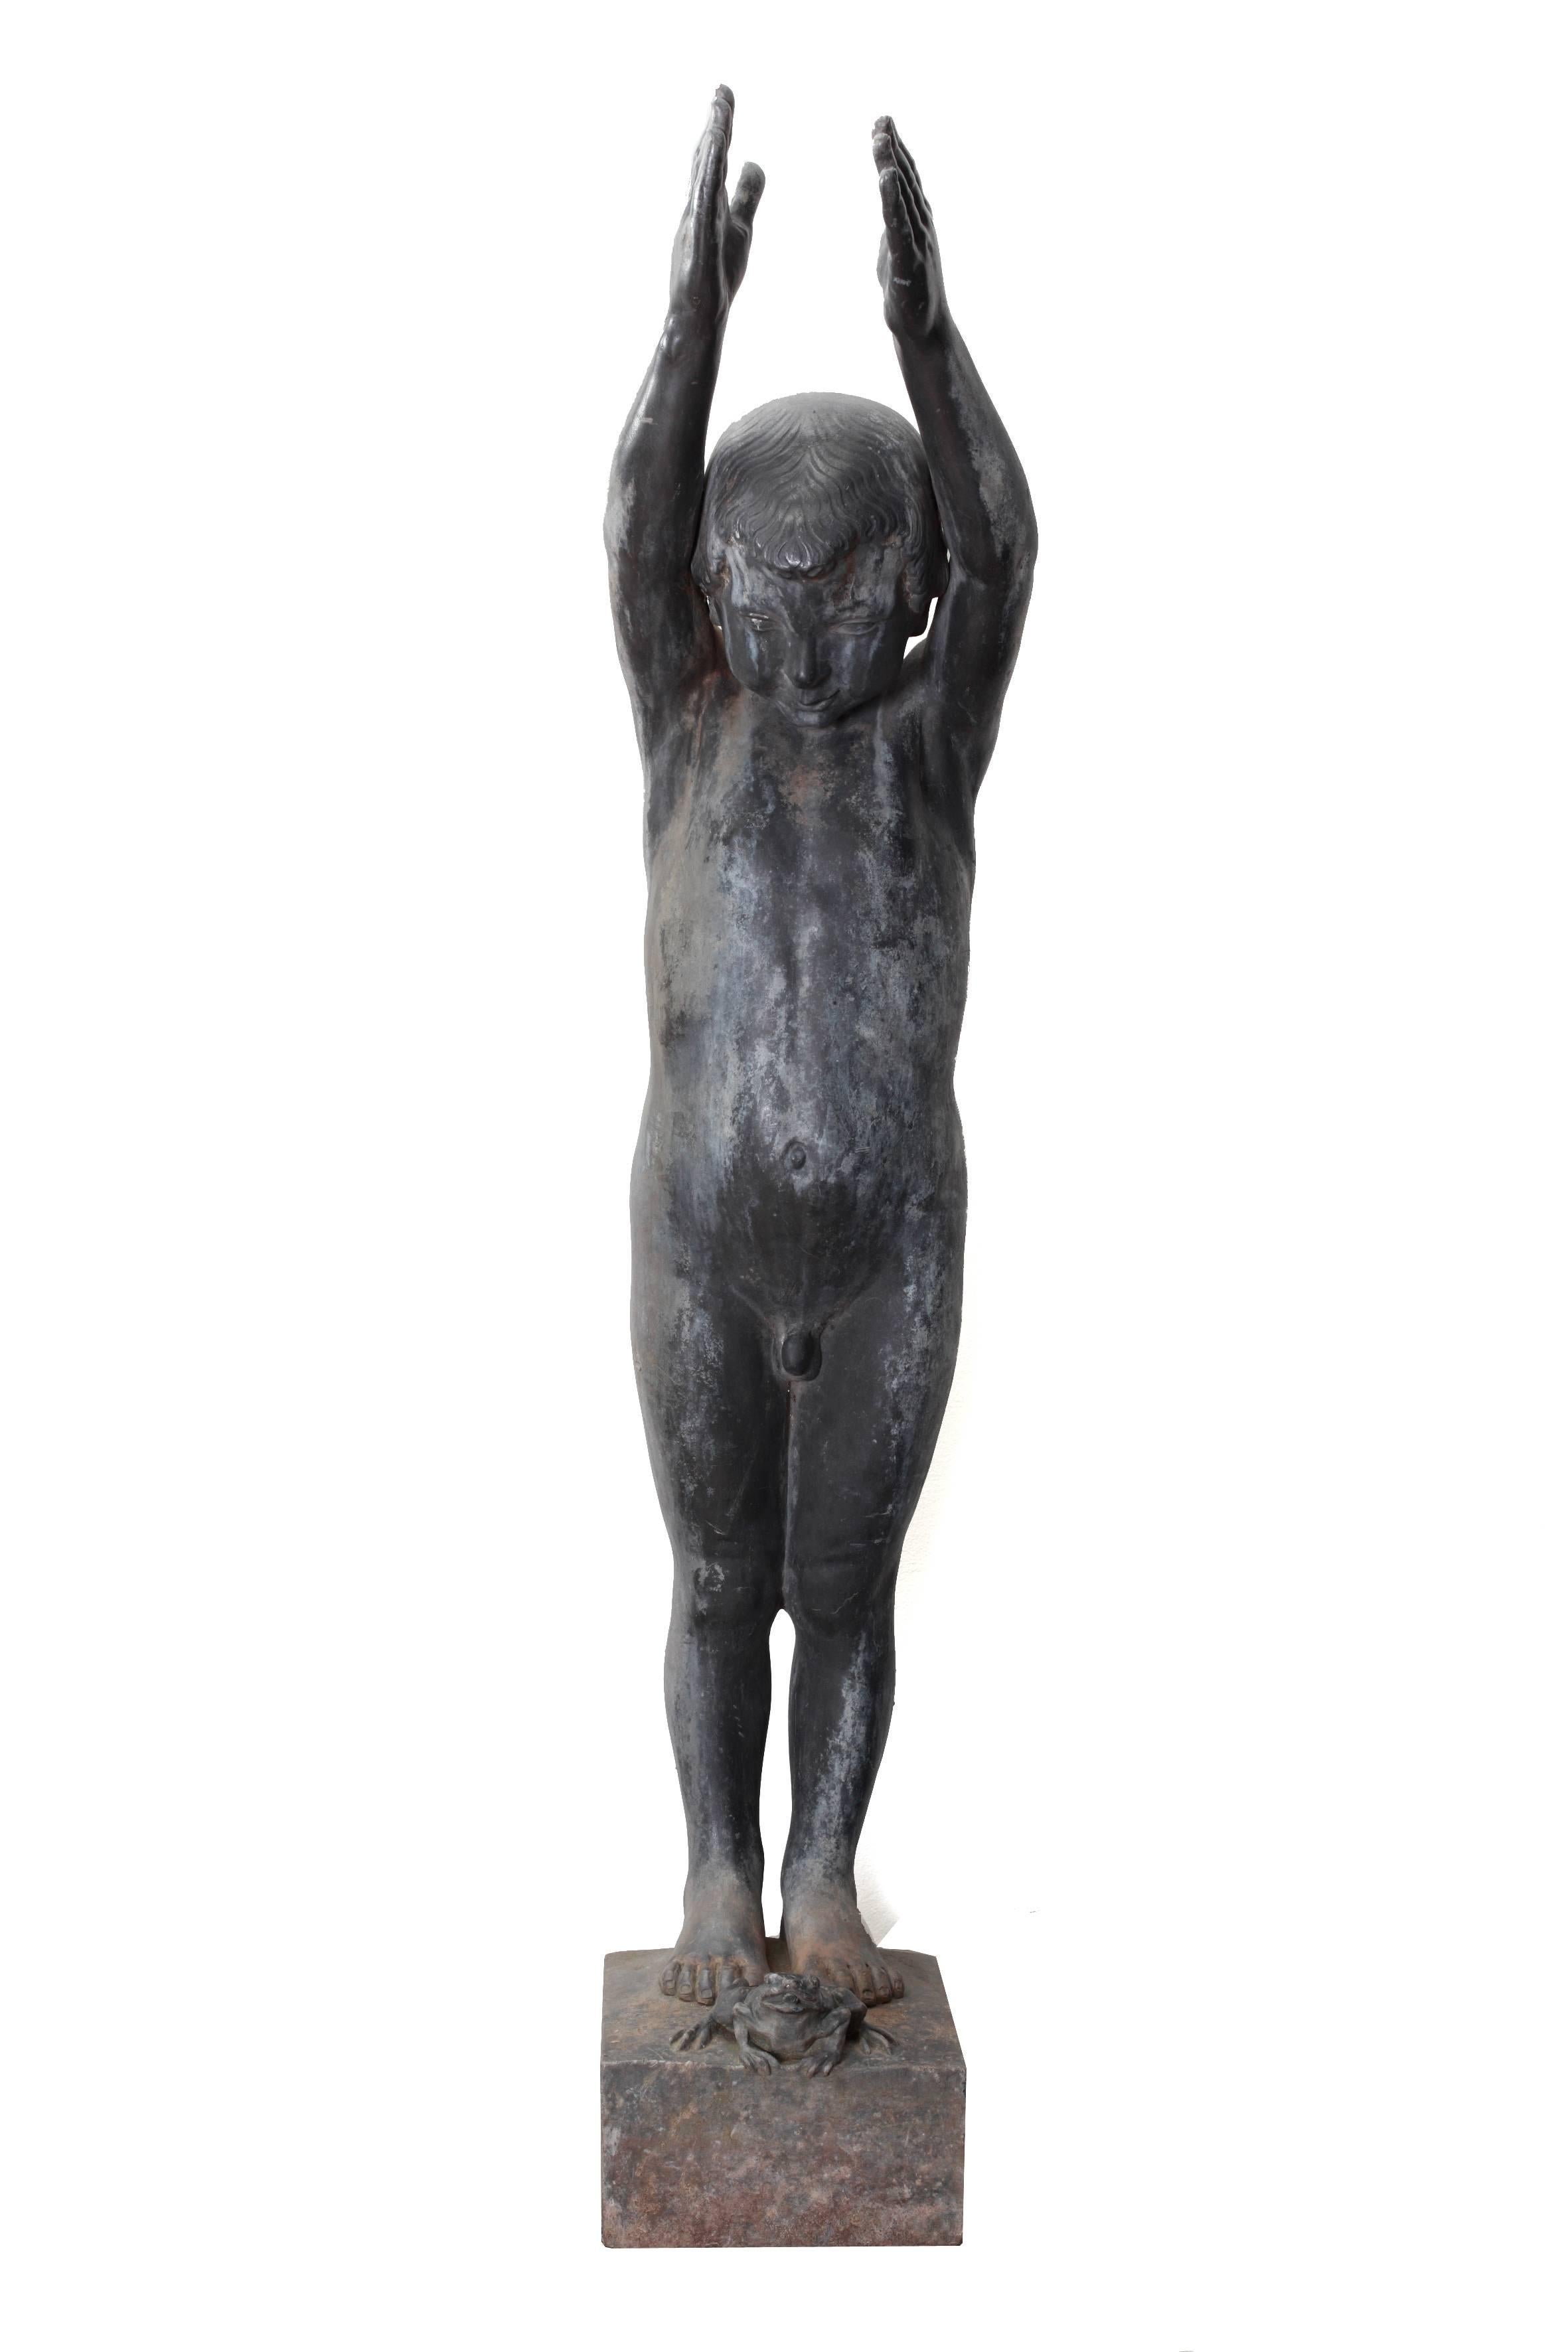 A nude lead figure of a boy with both arms raised above his head seeming poised to dive into water, raised on a square plinth. Design by Walter Gilbert, modelled by Louis Weingartner. From the early 1900s Gilbert often worked in partnership with